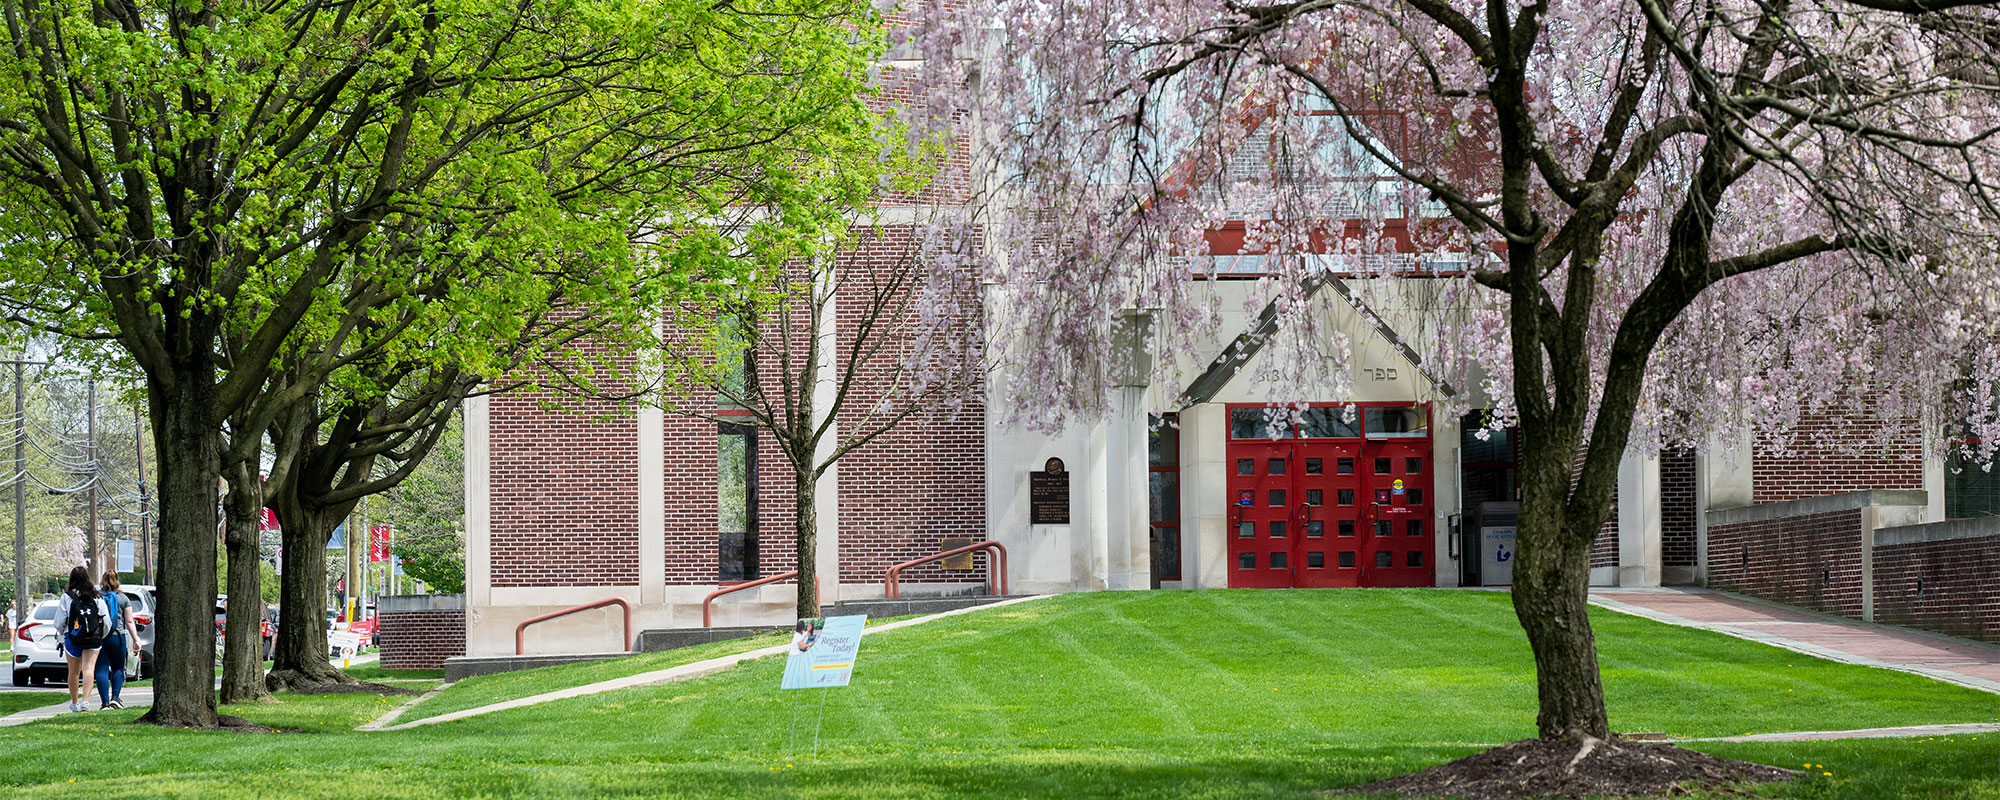 Spring blossoms and bright green leaves surround the Trexler Library on the campus of Muhlenberg College.